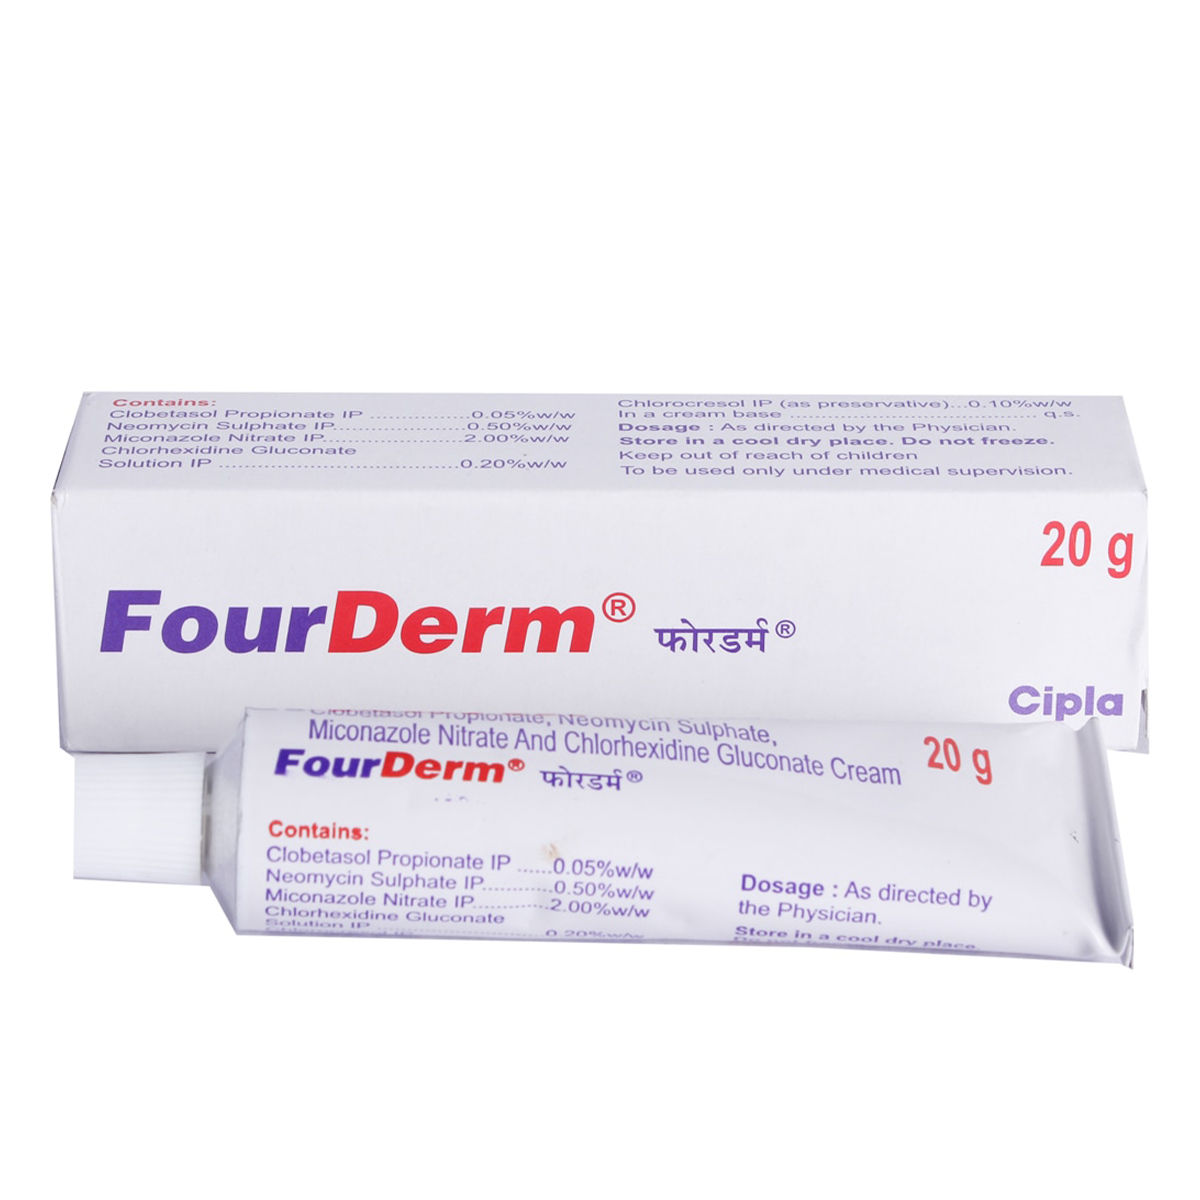 Fourderm Cream 20 gm Price, Uses, Side Effects, Composition - Apollo ...